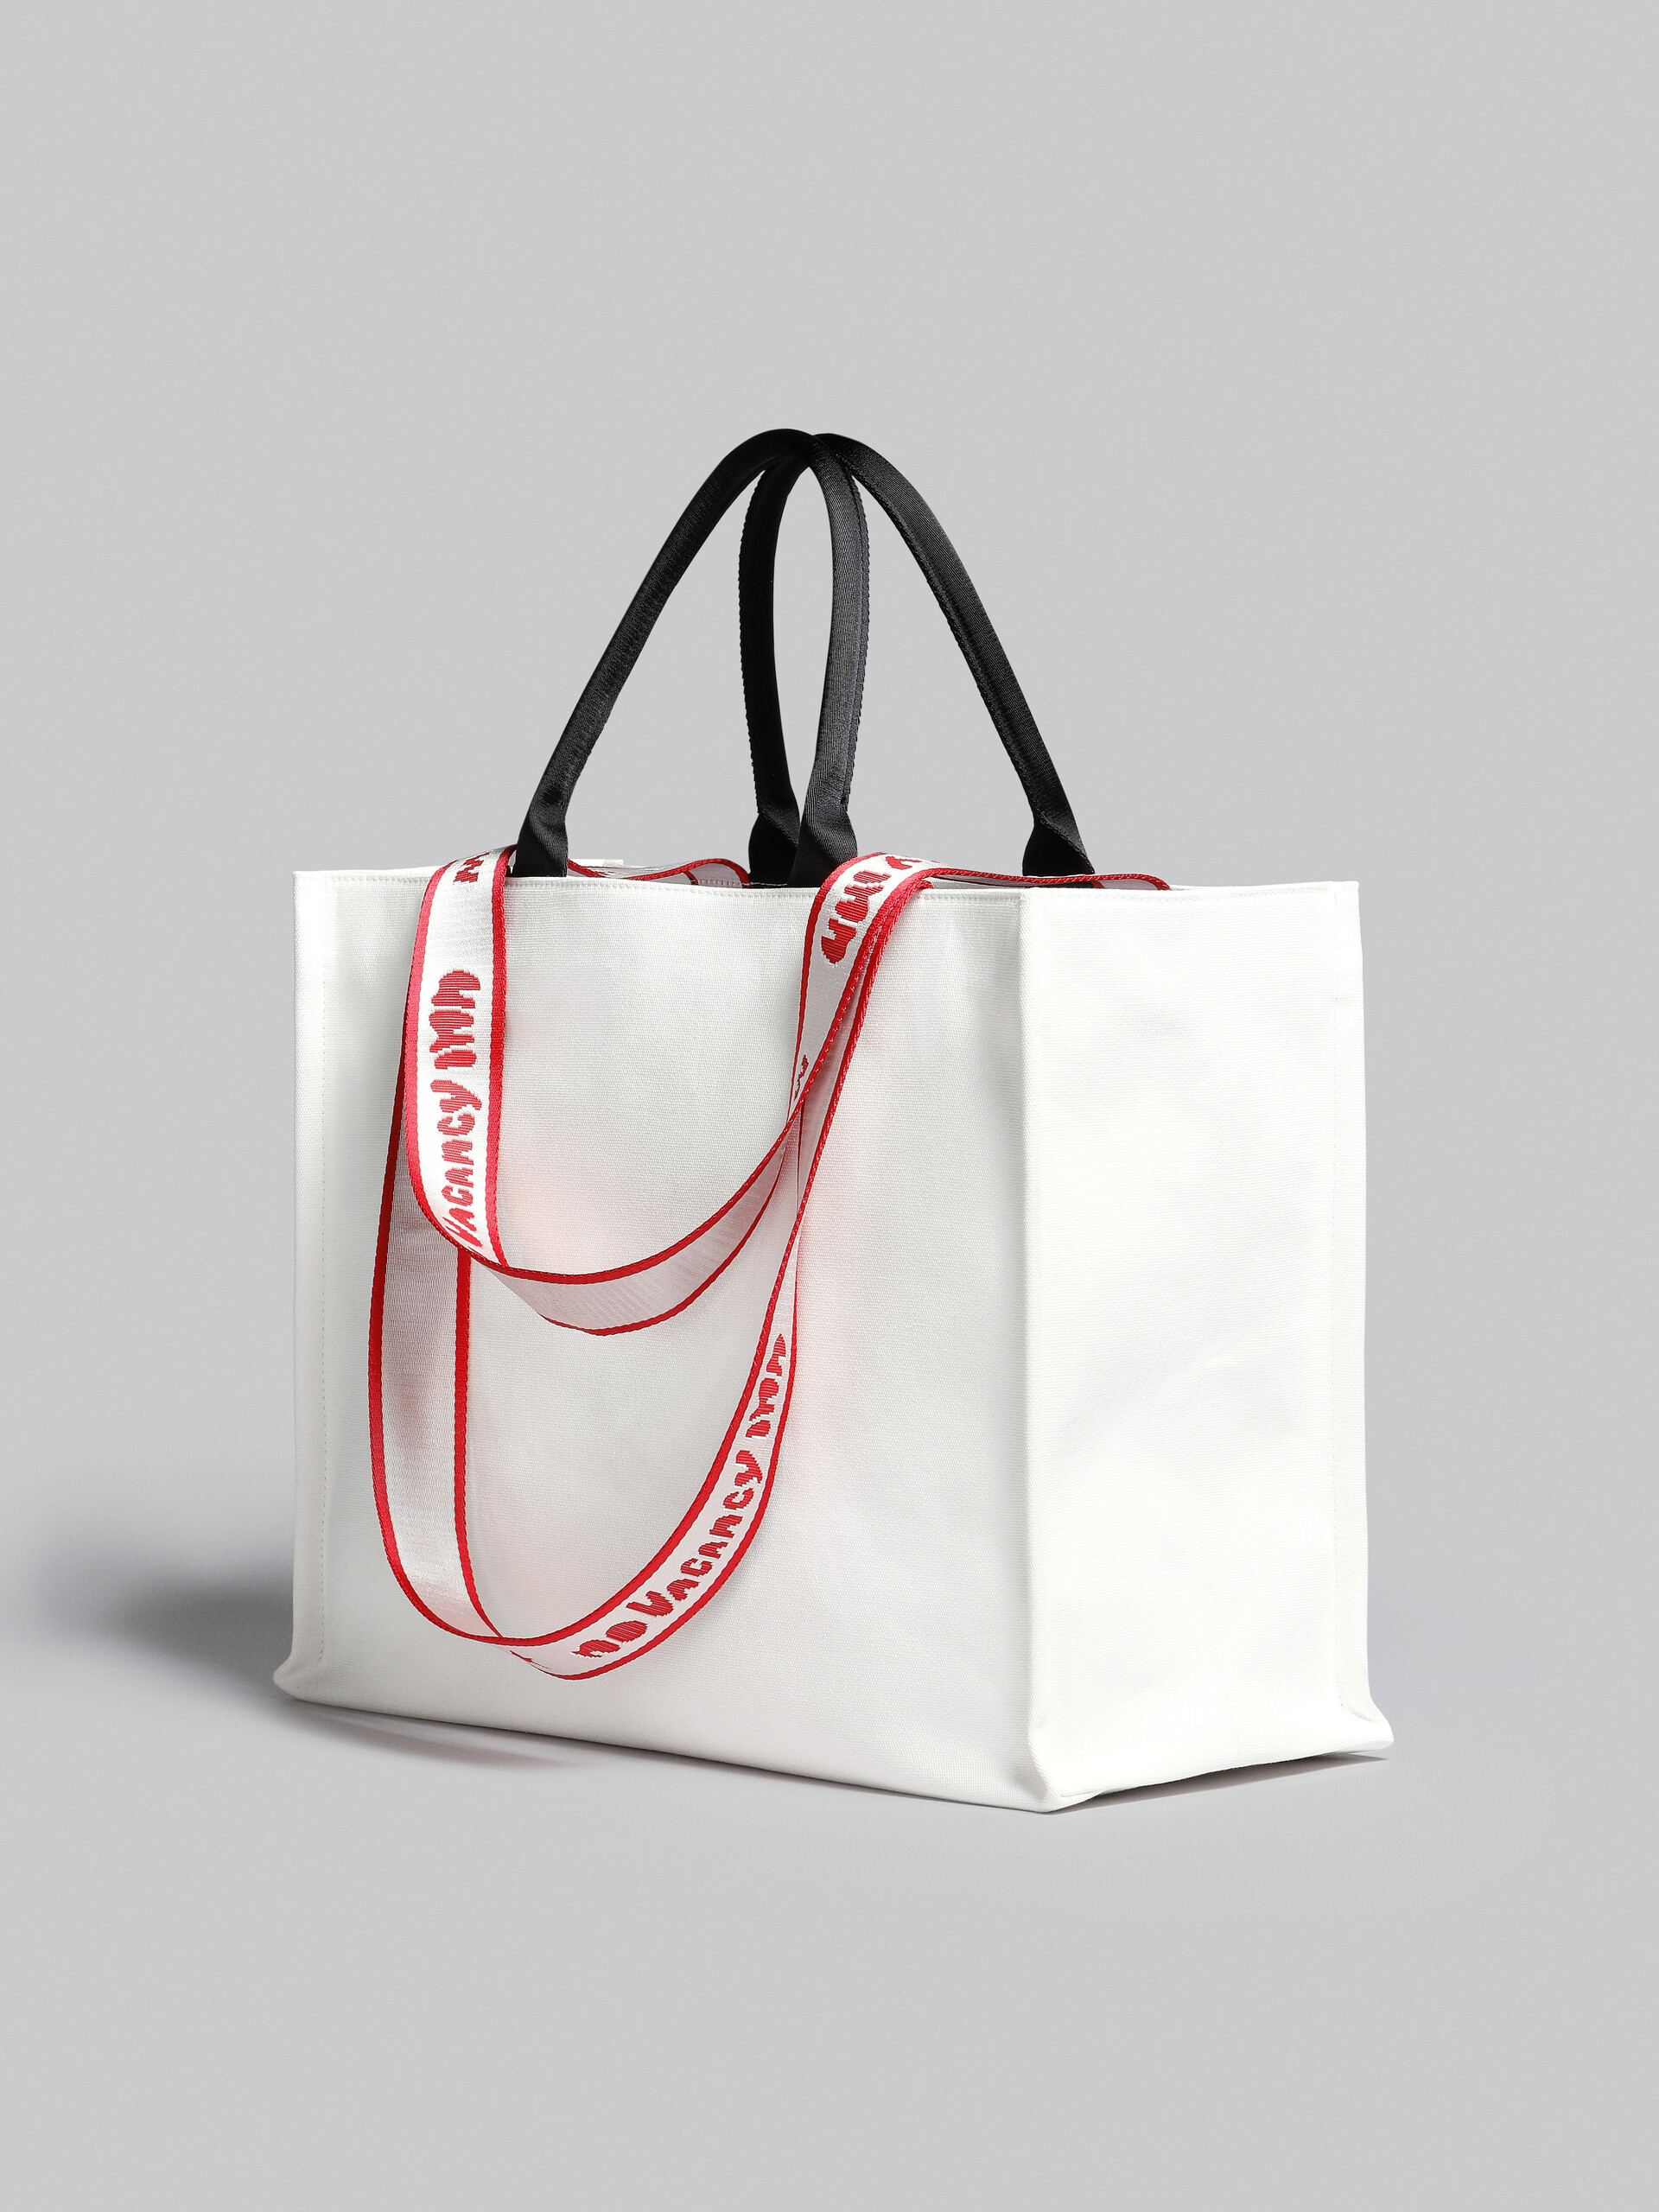 Marni x No Vacancy Inn - Bey Tote Bag in white canvas - Shopping Bags - Image 3